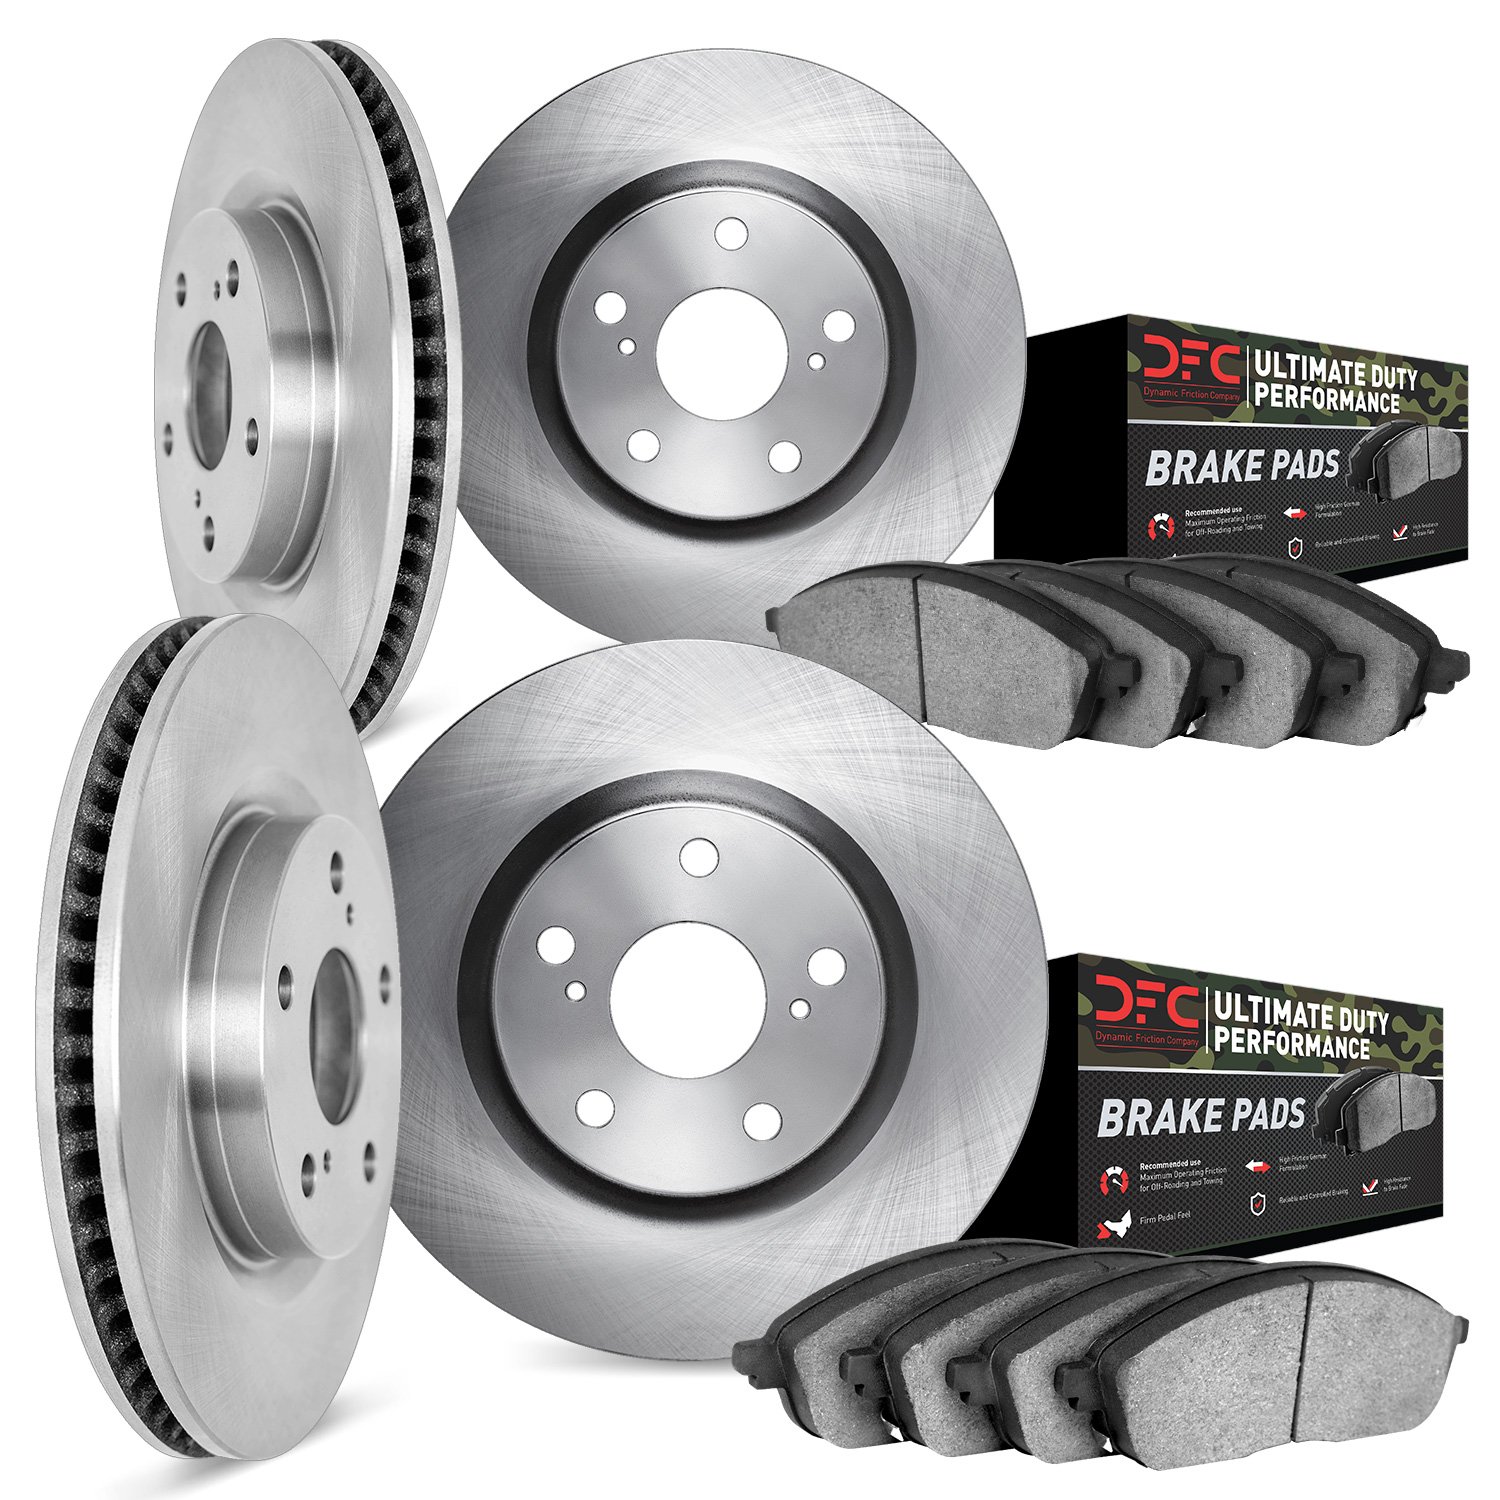 6404-40012 Brake Rotors with Ultimate-Duty Brake Pads, 2003-2003 Mopar, Position: Front and Rear